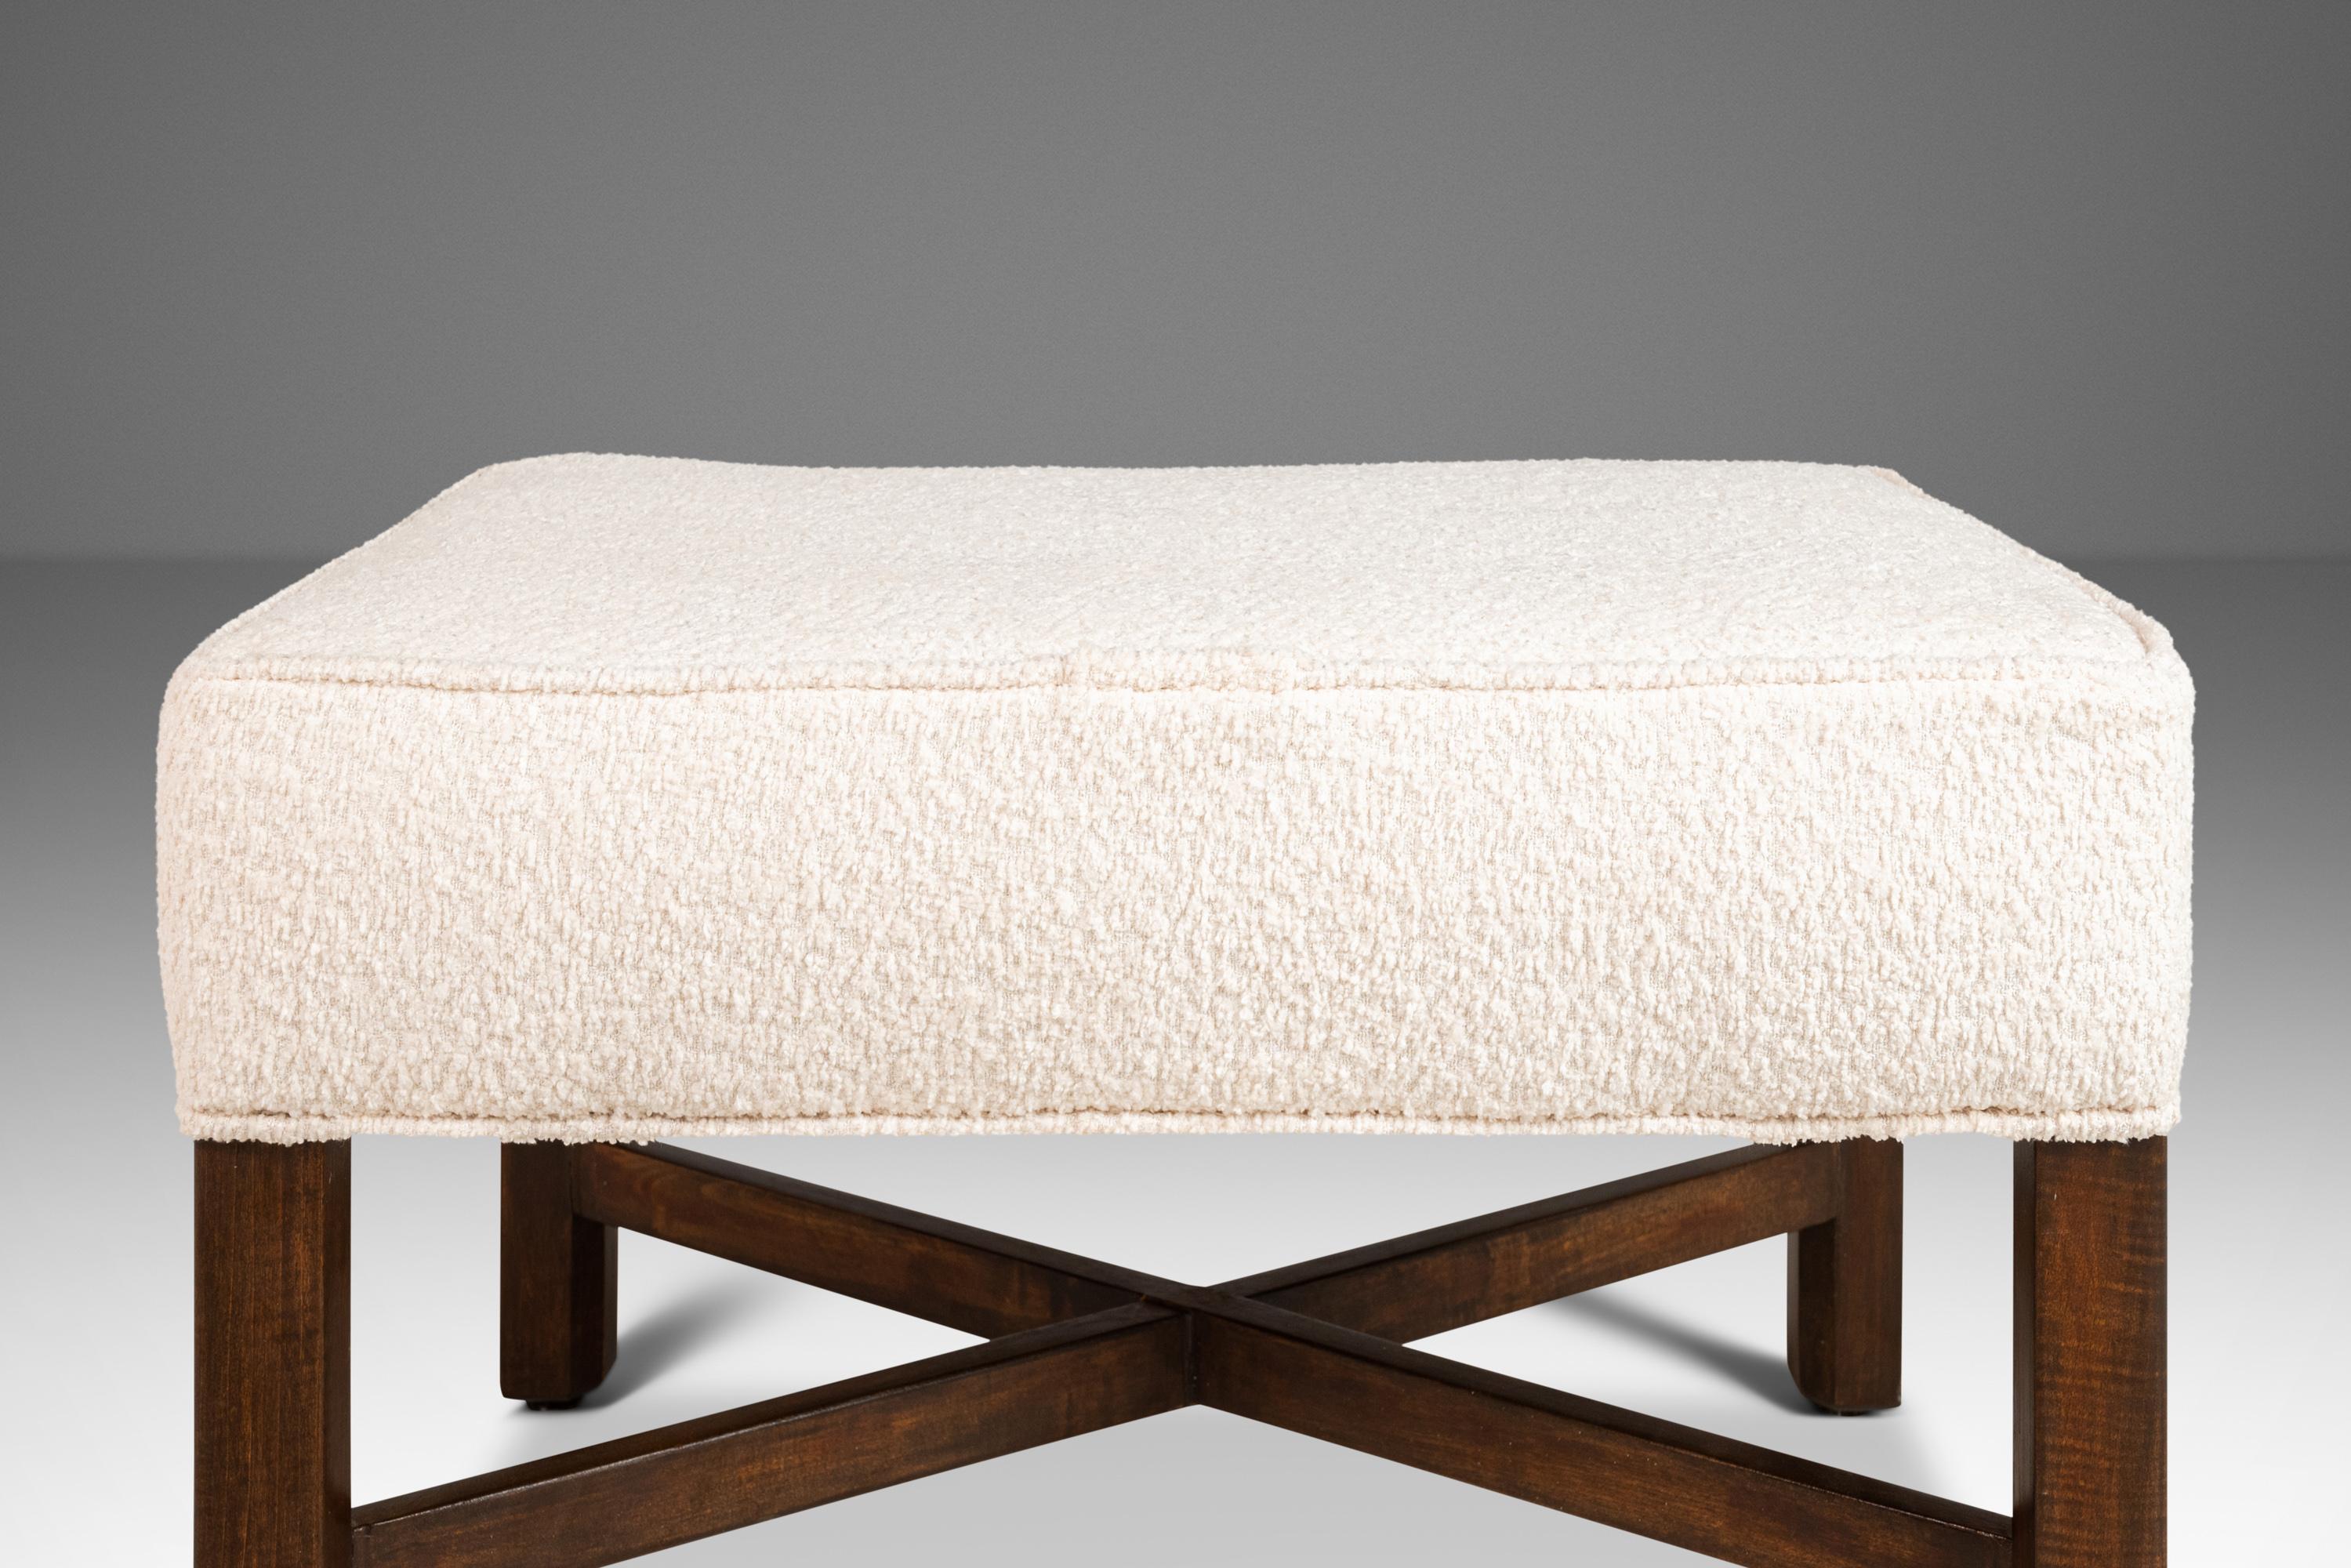 Set of Two '2' Ottomans Footstools After Edward Wormley for Dunbar, USA, 1960s For Sale 1